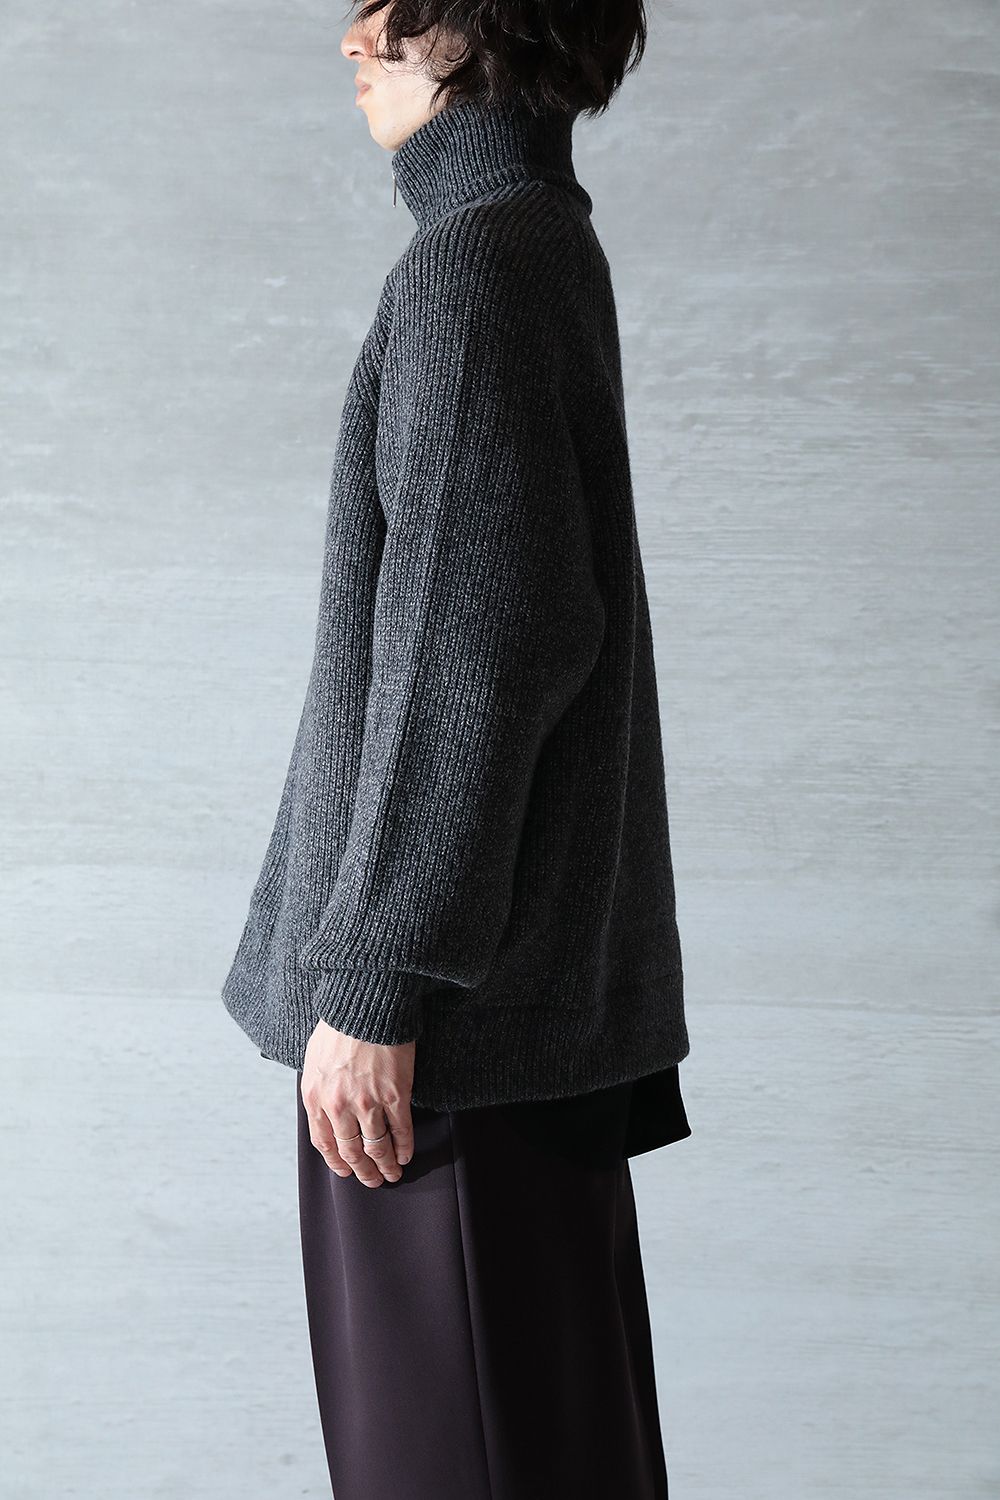 THE RERACS - 【23AW/ラスト1点】RERACS DRIVERS KNIT(TOP GRAY/BULKY